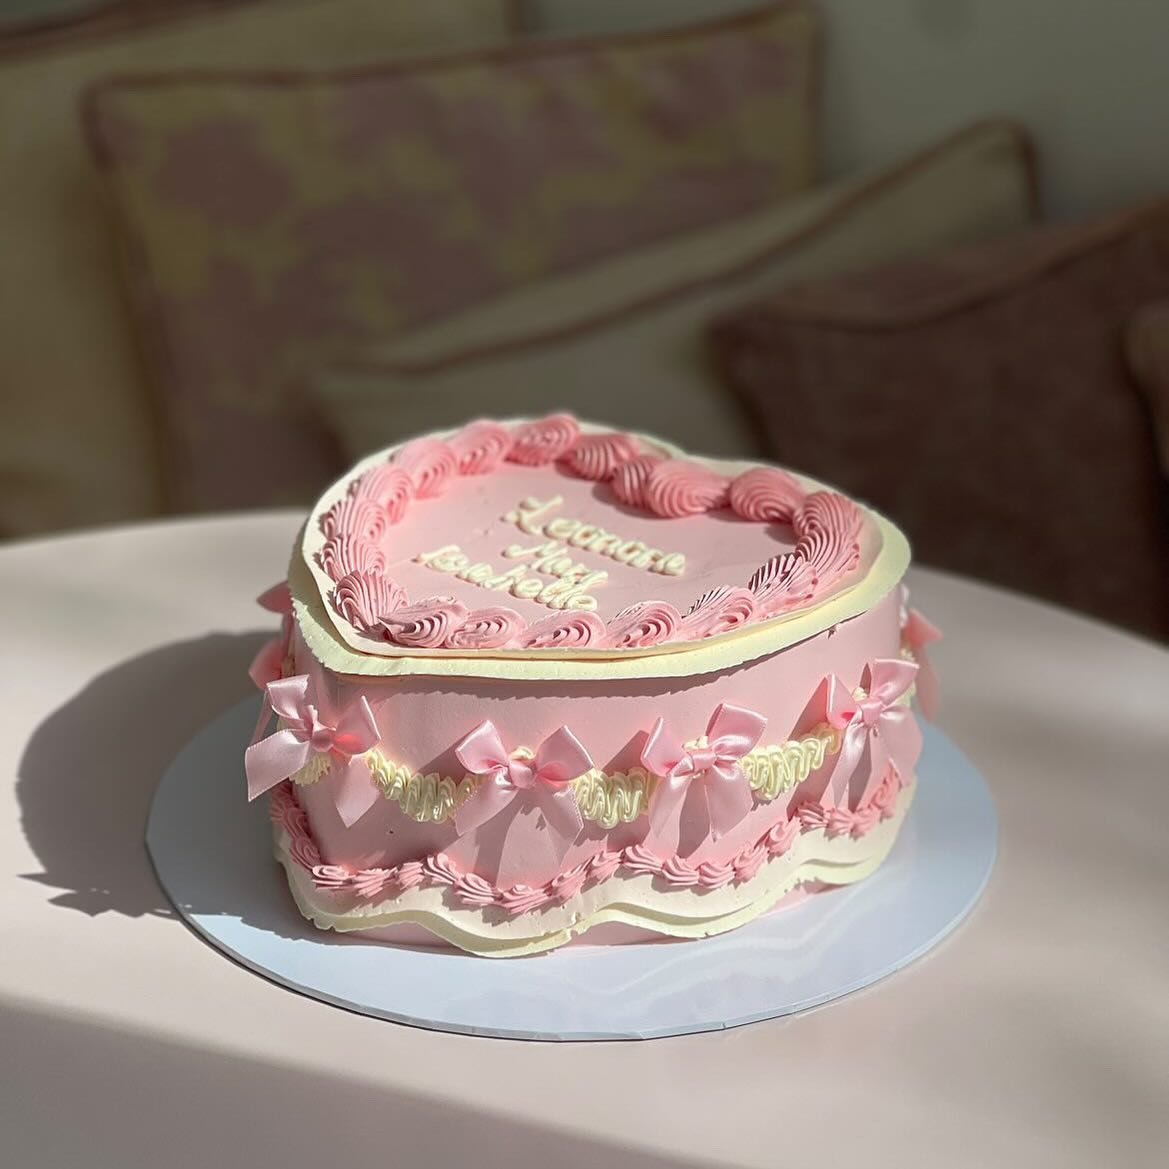 As part of our lifestyle concierge service, we arrange customised, delicious cakes too! 🍰 

Order six to eight weeks in advance for your perfect vintage cake of dreams, delivered by our team within London. 

It&rsquo;s time to have your cake, and ea